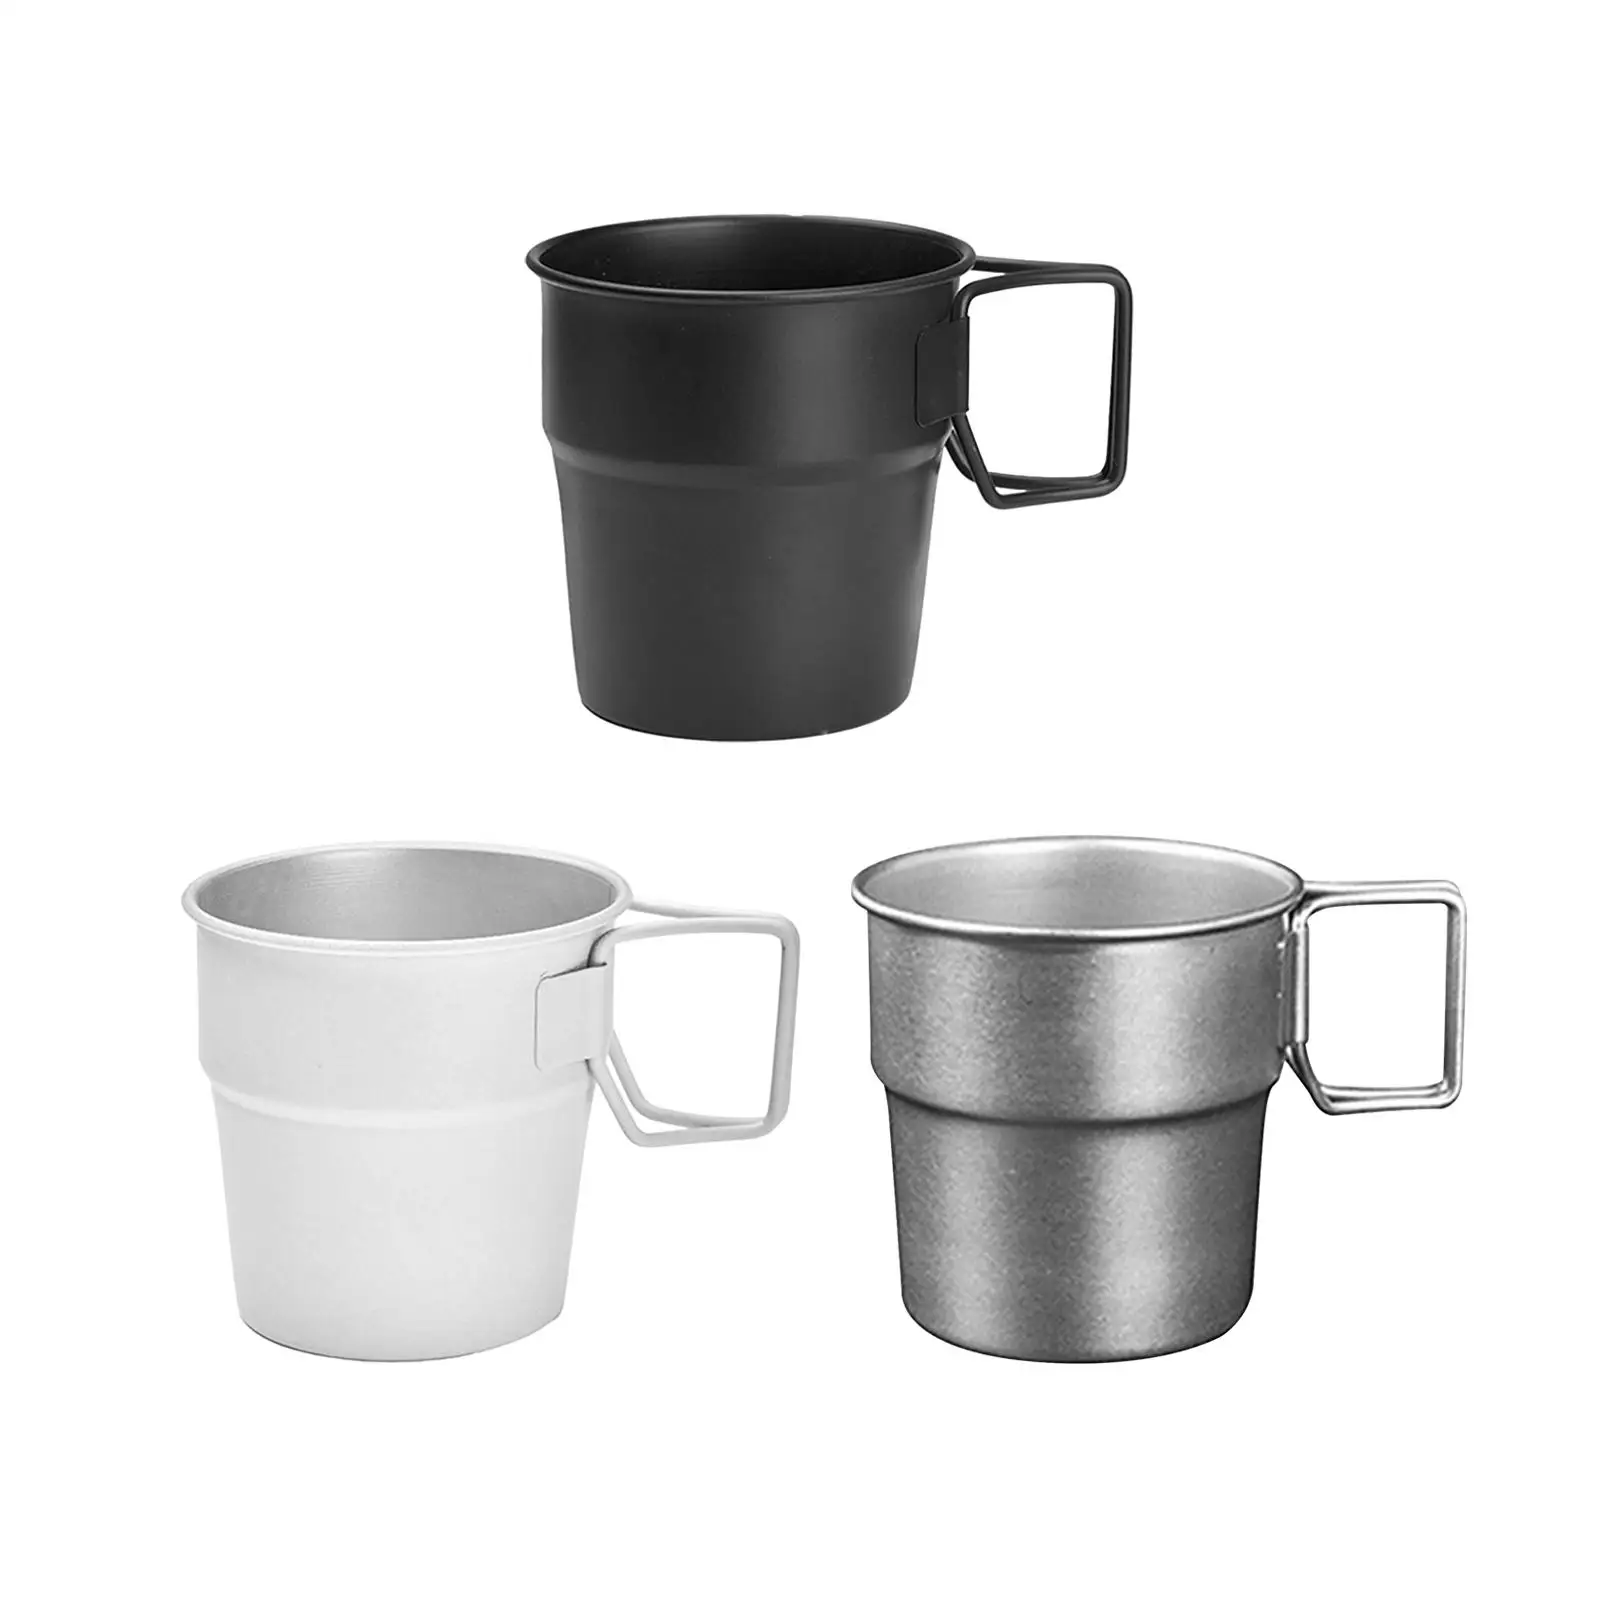 Stainless Steel Cups Pint Cups 300ml Capacity Stackable Reusable for Hot and Cold Drinks Sports Camping Traveling Teachers